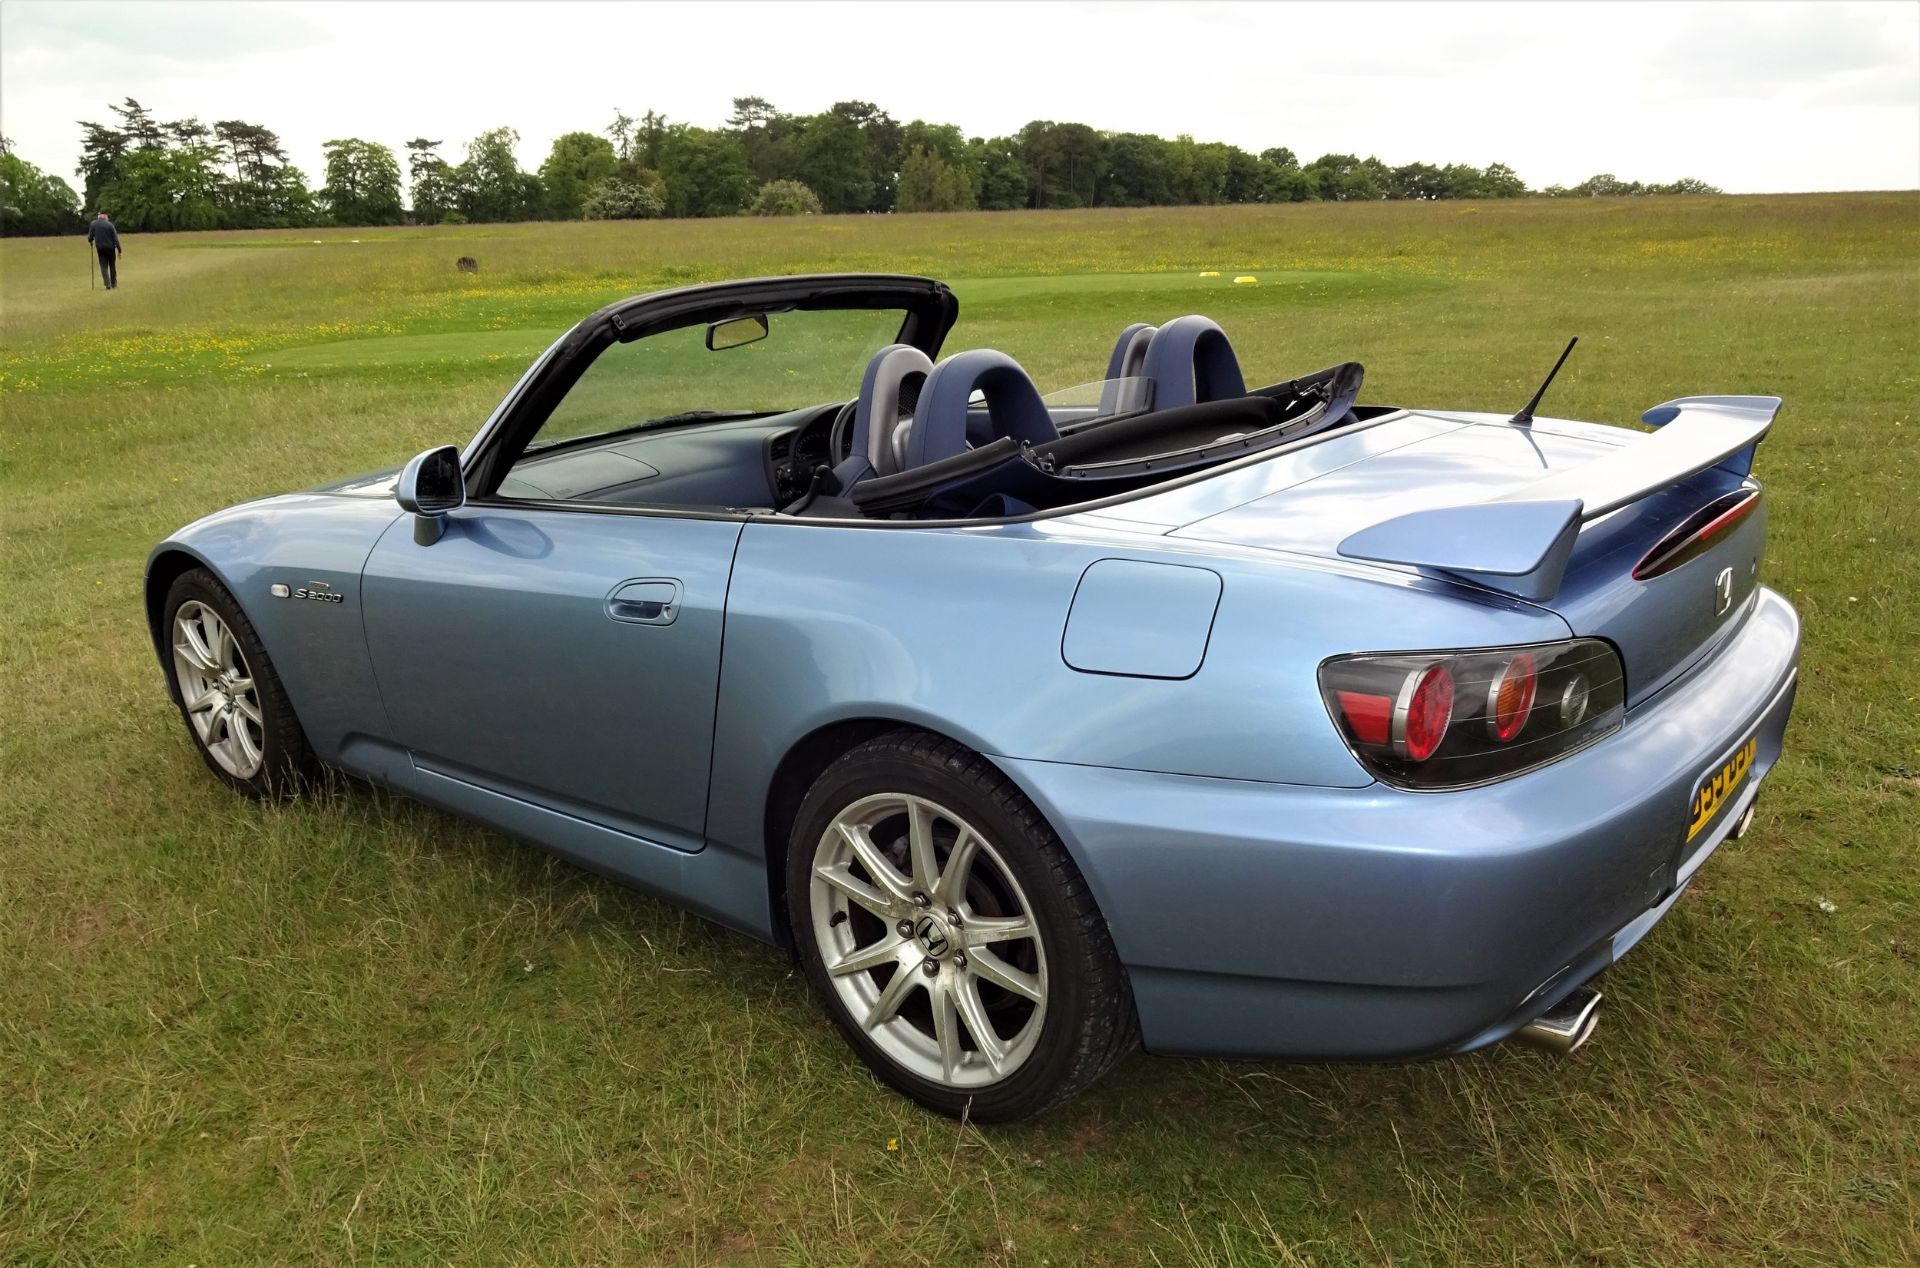 2005 HONDA S2000 Registration Number: RJ55 BSY Chassis Number: JHMPA11305S202028 - In current - Image 5 of 15